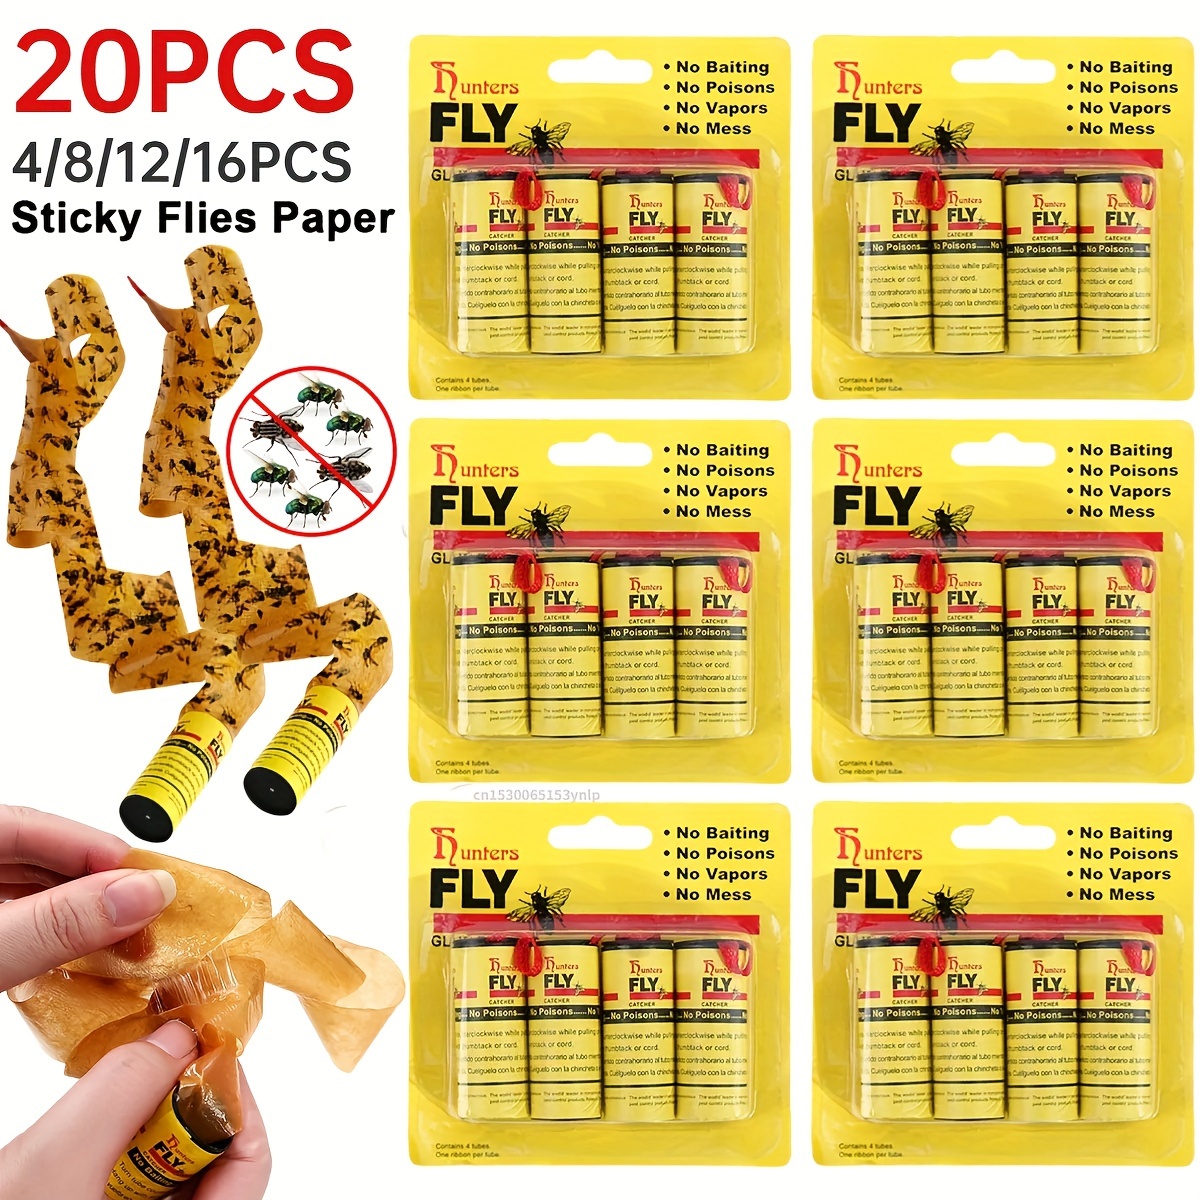 16PCS Sticky Fly Ribbons Roll Strong Glue Double Sided Flies Paper